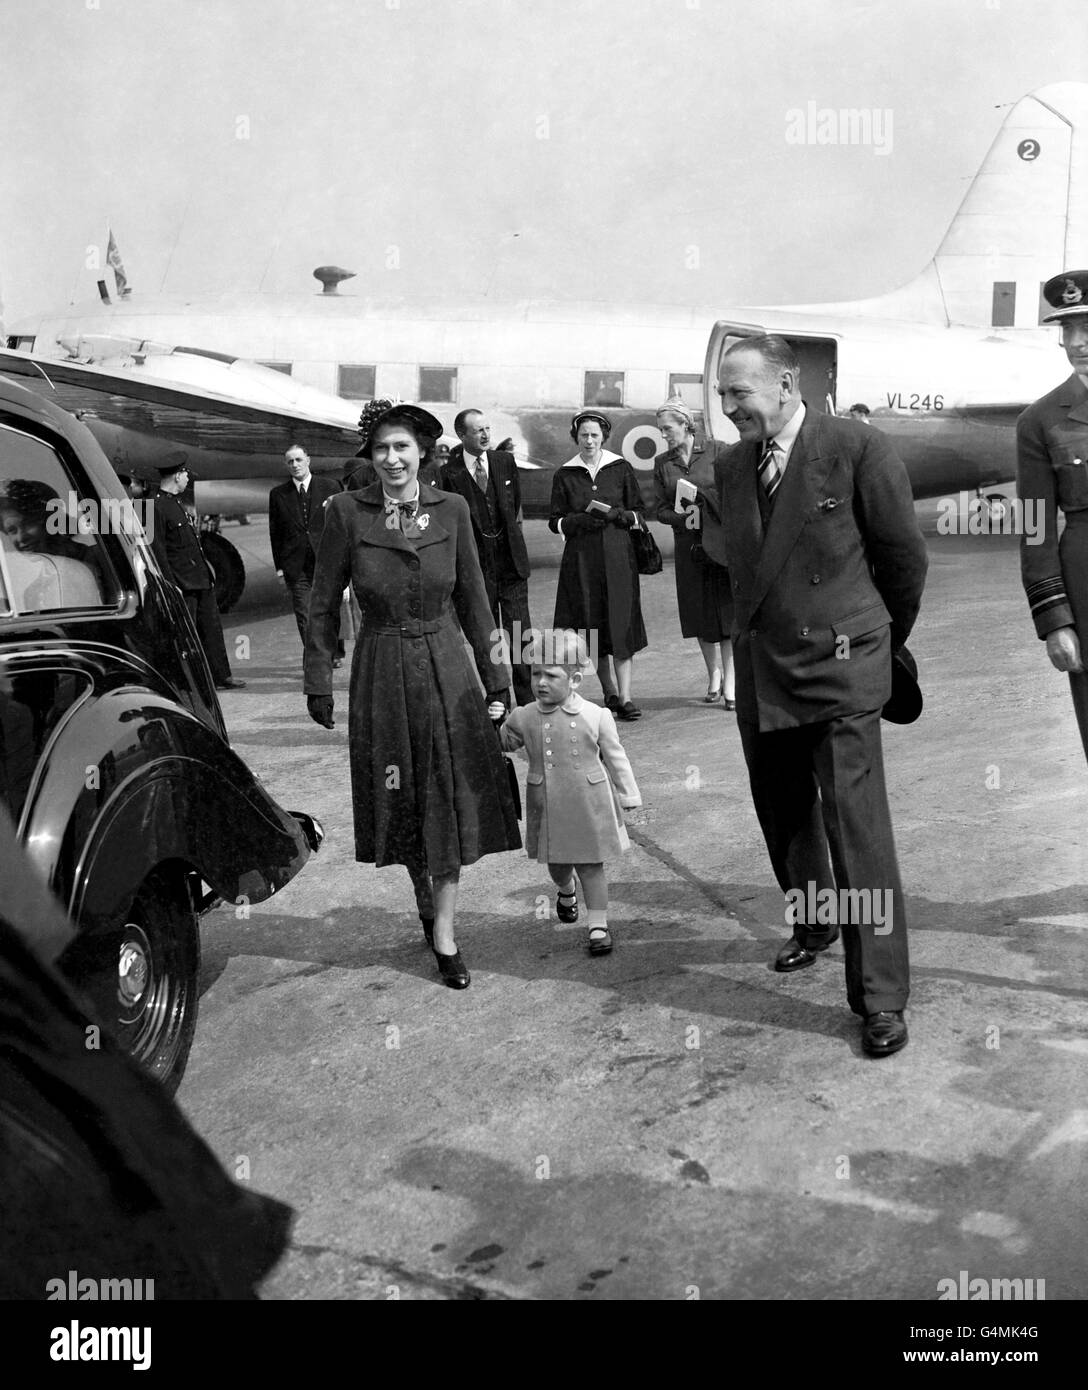 Prince Charles holds the hand of his mother, Princess Elizabeth, as they walked to the Royal car at Heathrow Airport, when the Princess returned home after her visit to Rome with the Duke of Edinburgh. Stock Photo